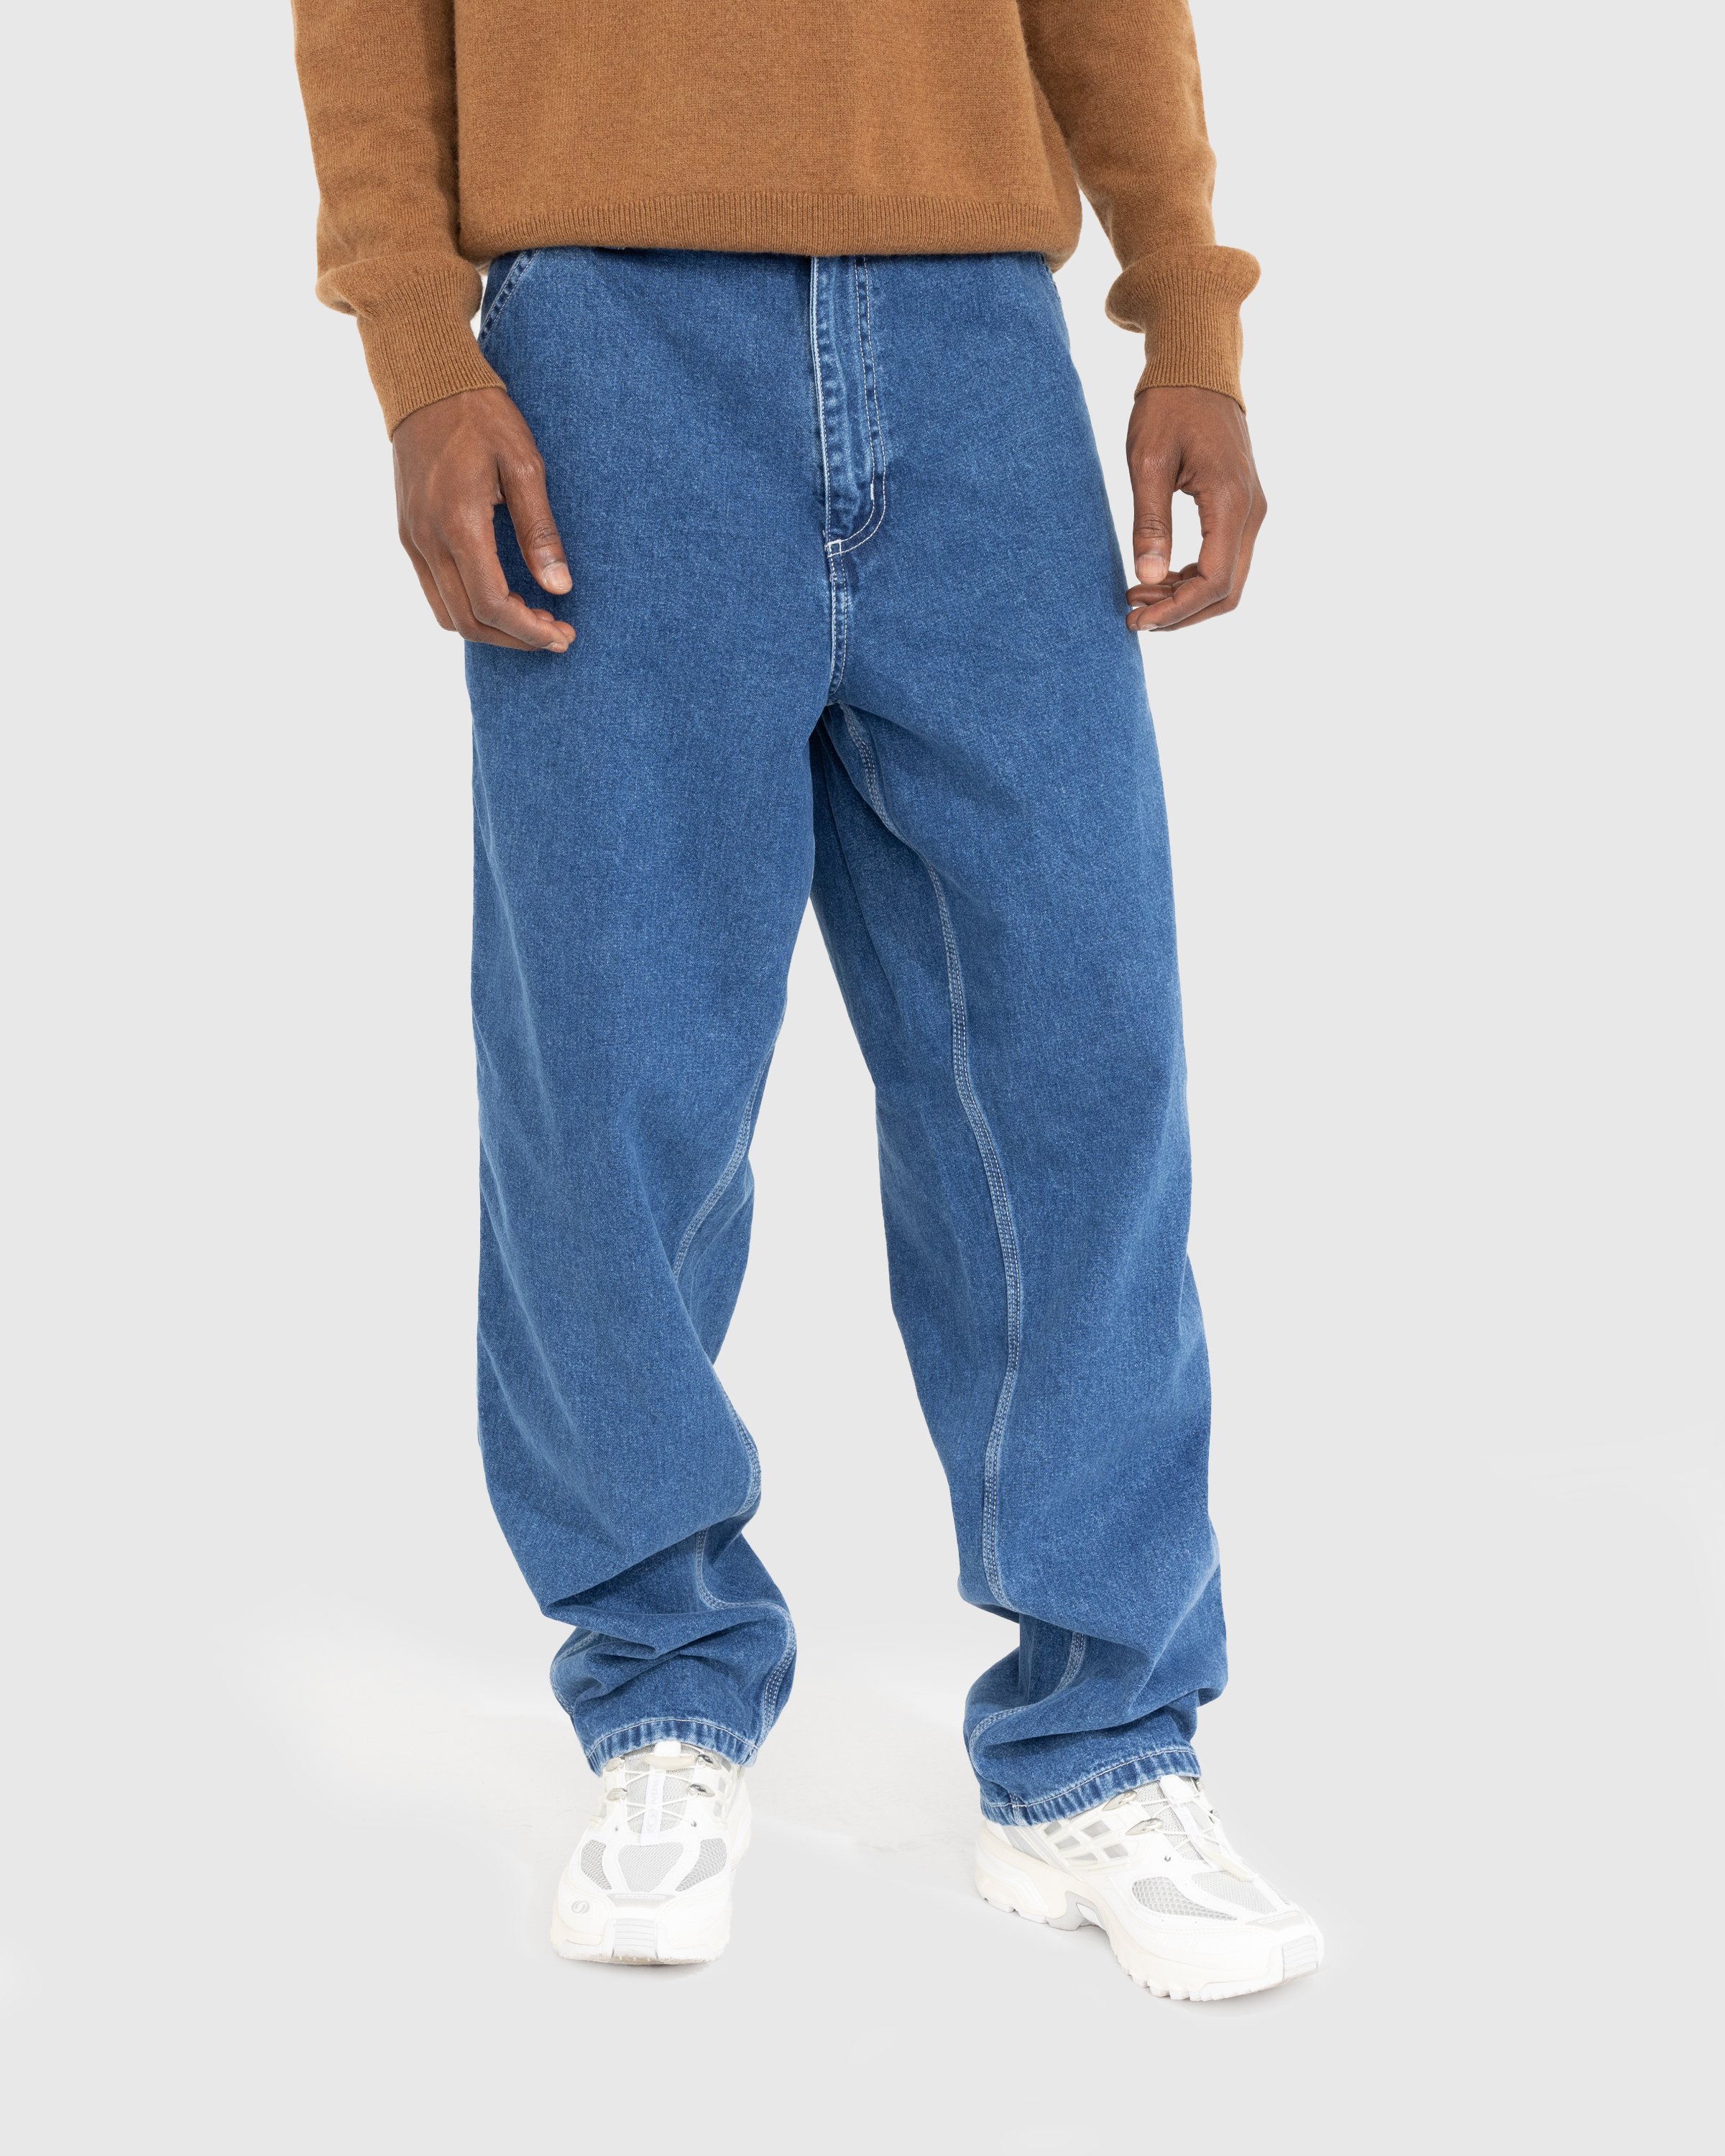 Carhartt WIP - Simple Pant Blue/Stone-Washed - Clothing - Blue - Image 2